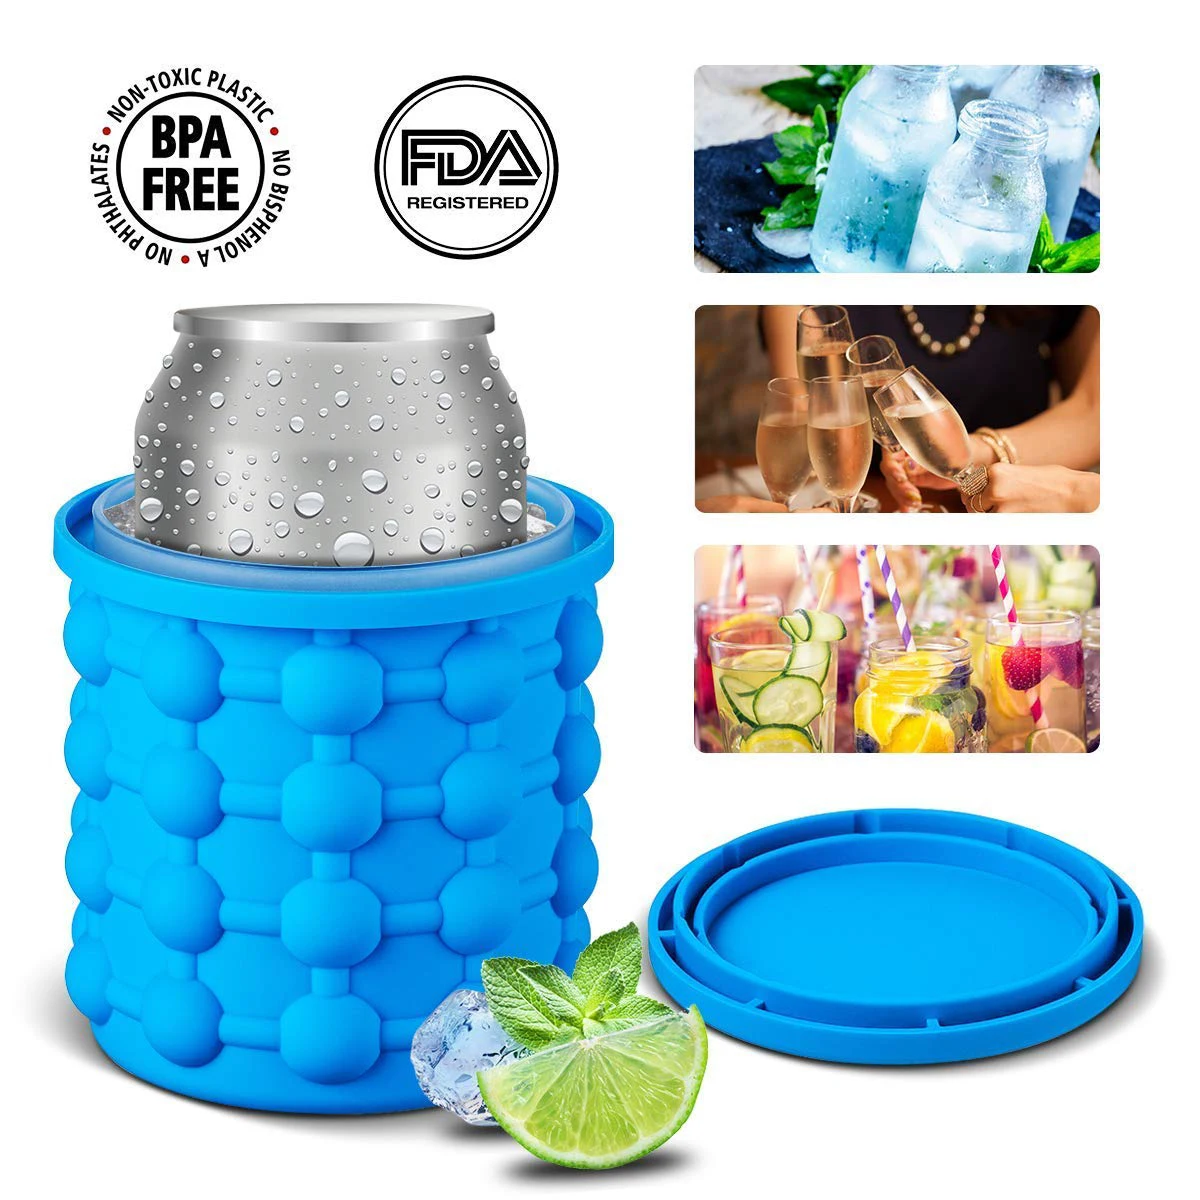 Large 2 in 1 Silicone Ice Bucket Ice Cube Maker Genie Mold With Lid Space Saving Crushed Ice Tray Mold Wine Chilling Bucket Tool